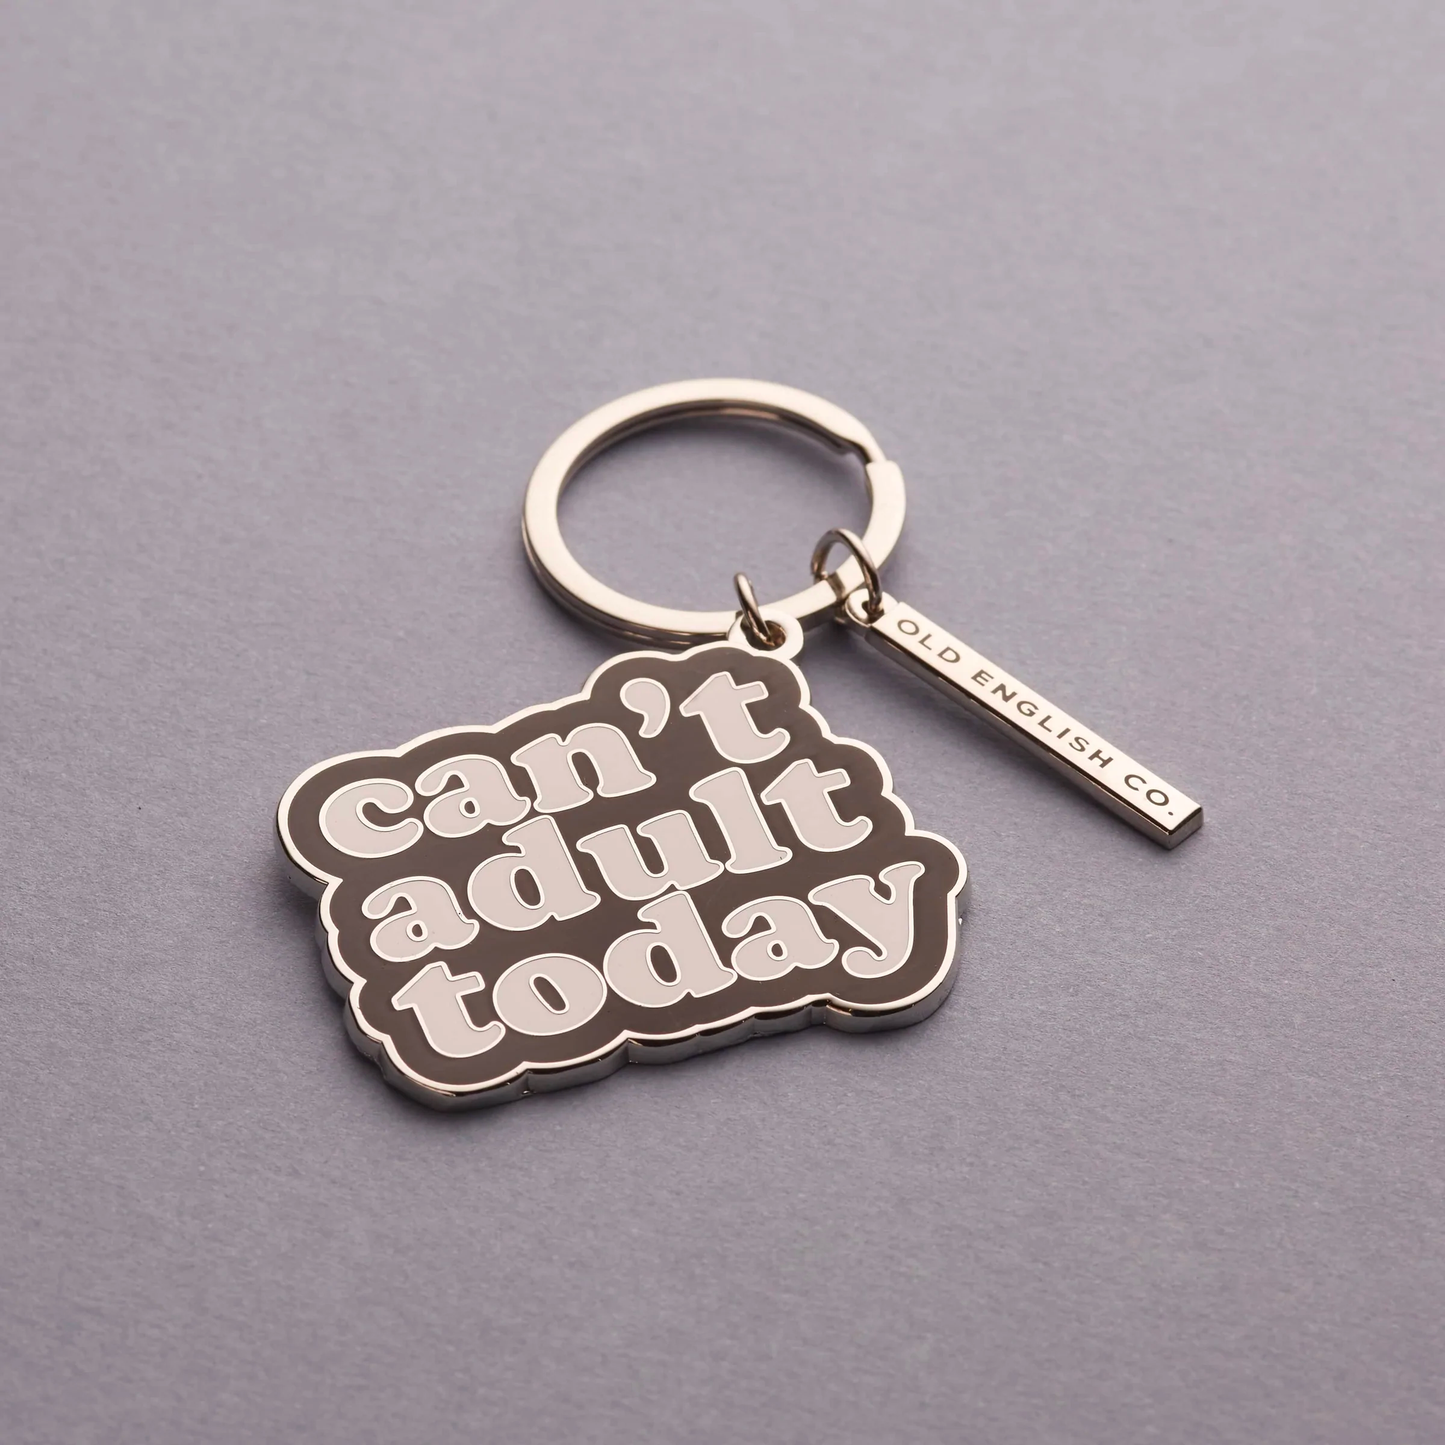 Can't Adult Today Keychain